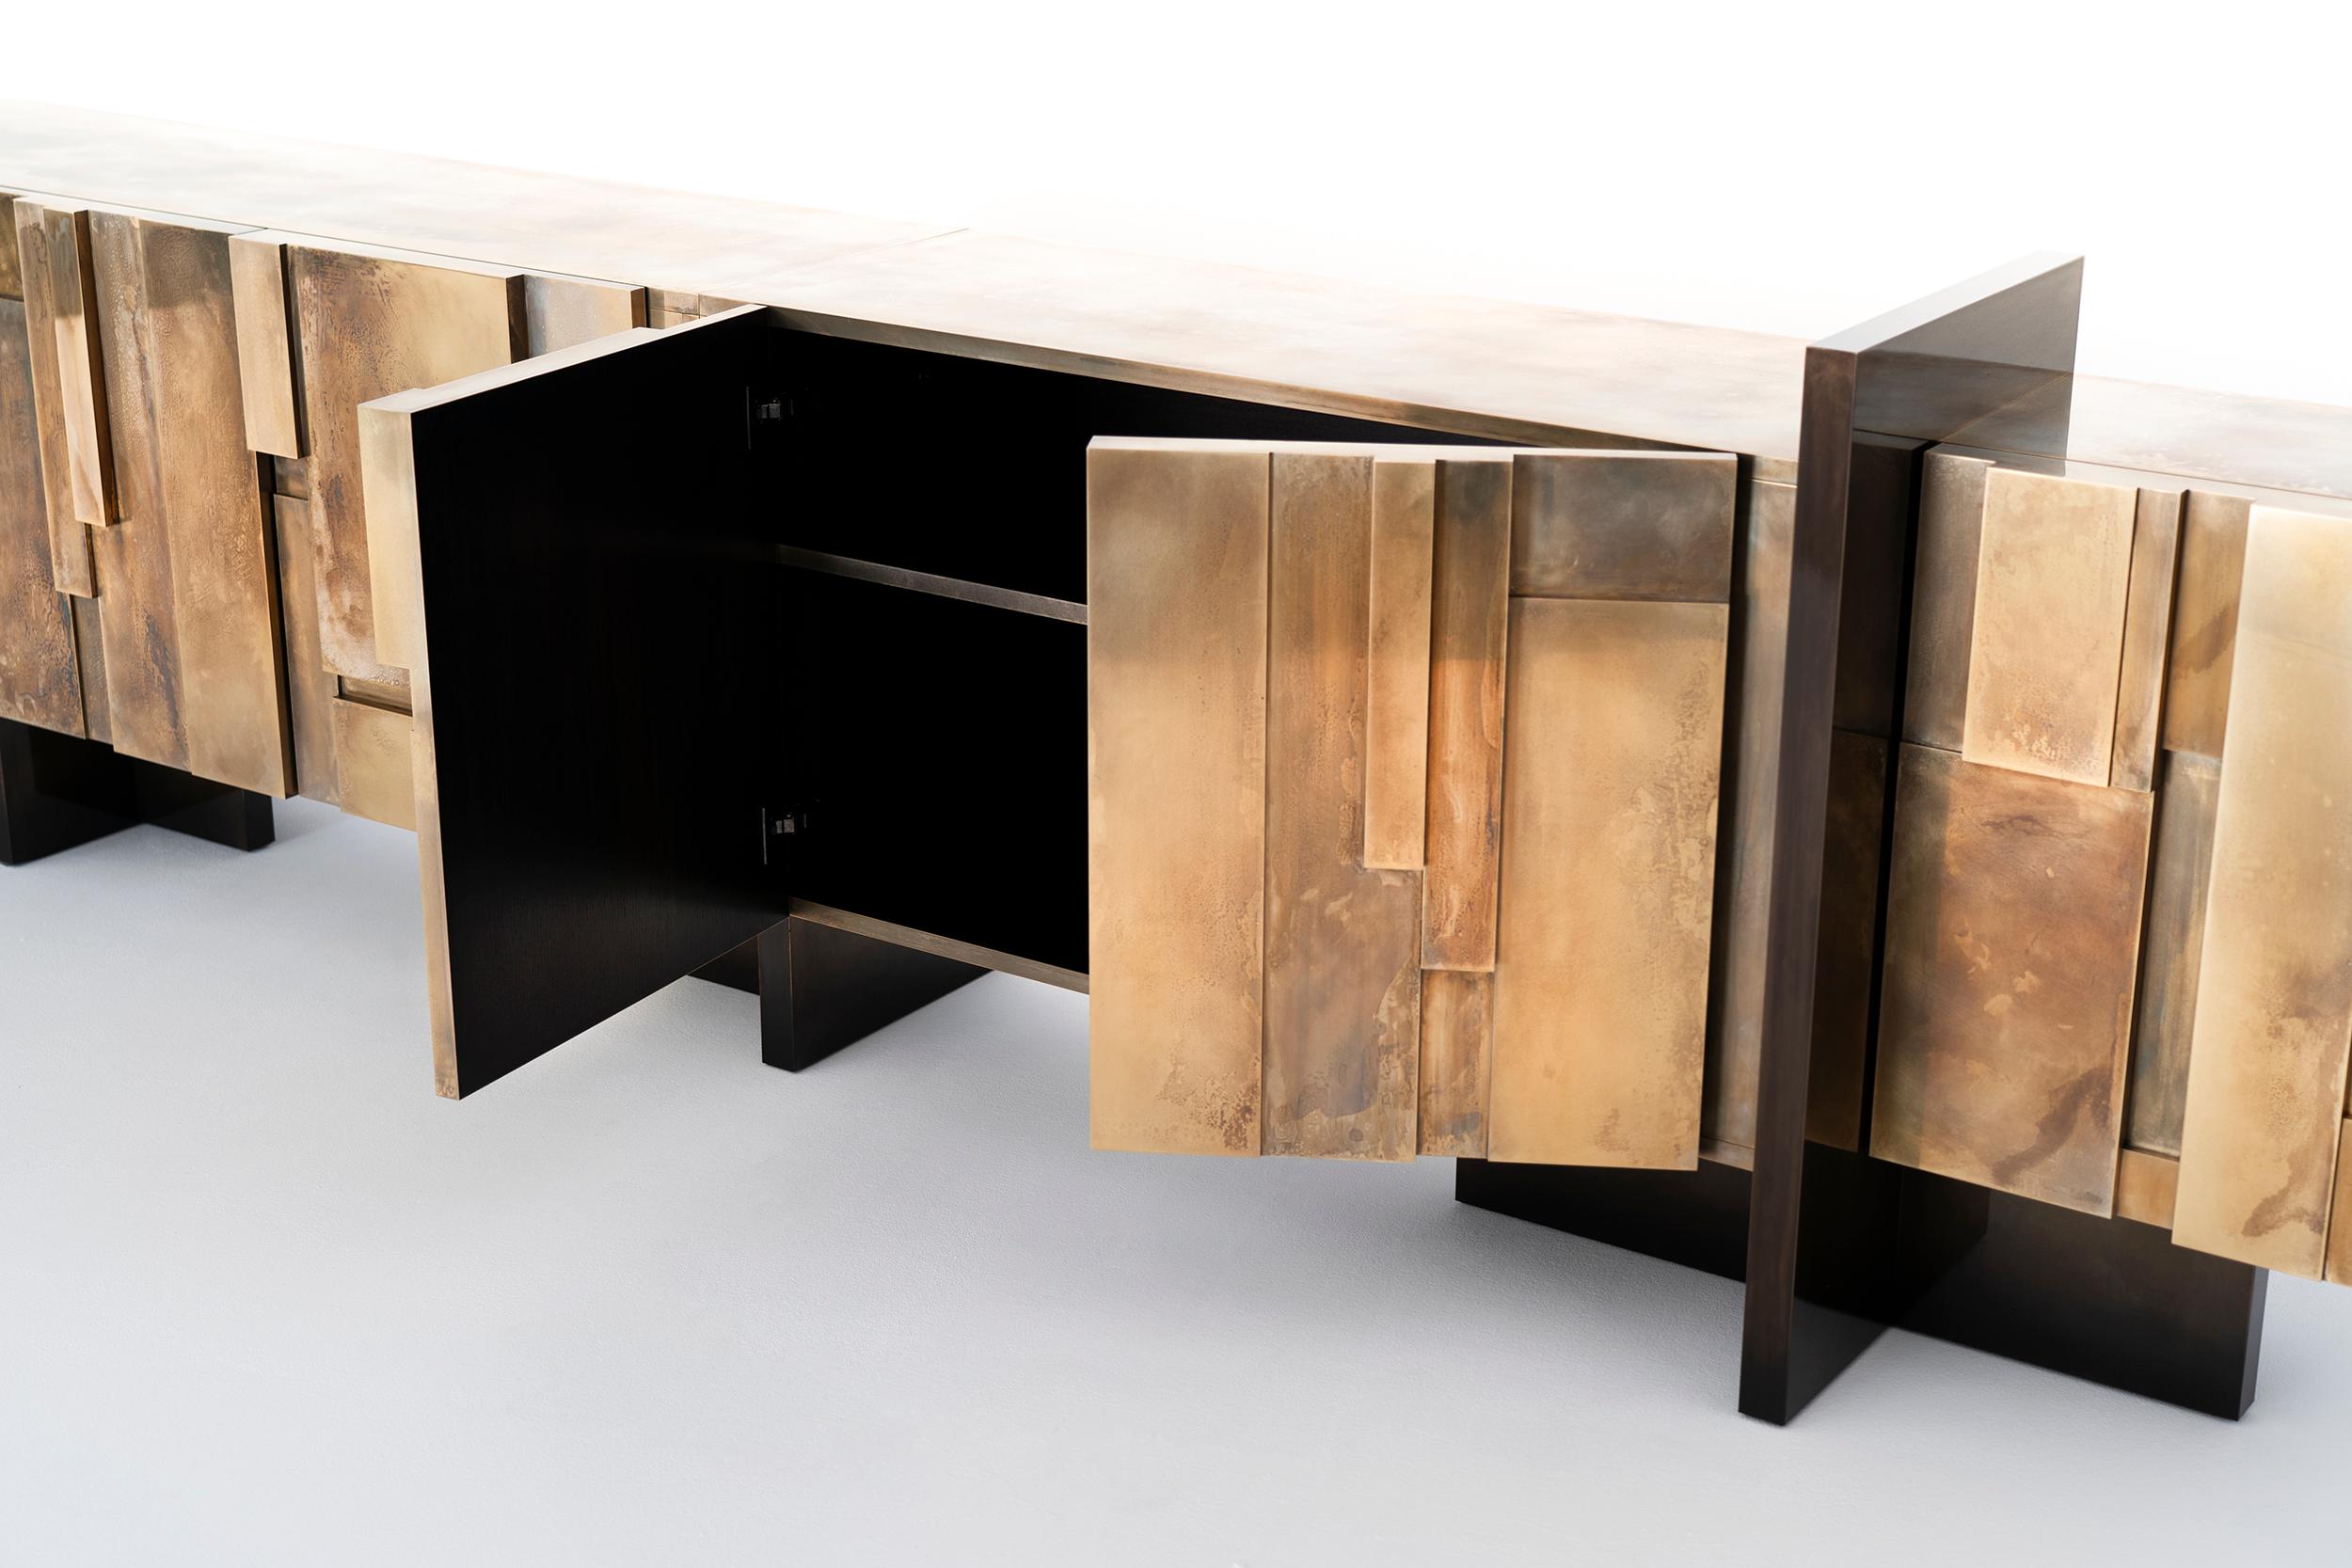 European MUR, 21st Century Unique Contemporary Brass Large Freestanding Sideboard For Sale